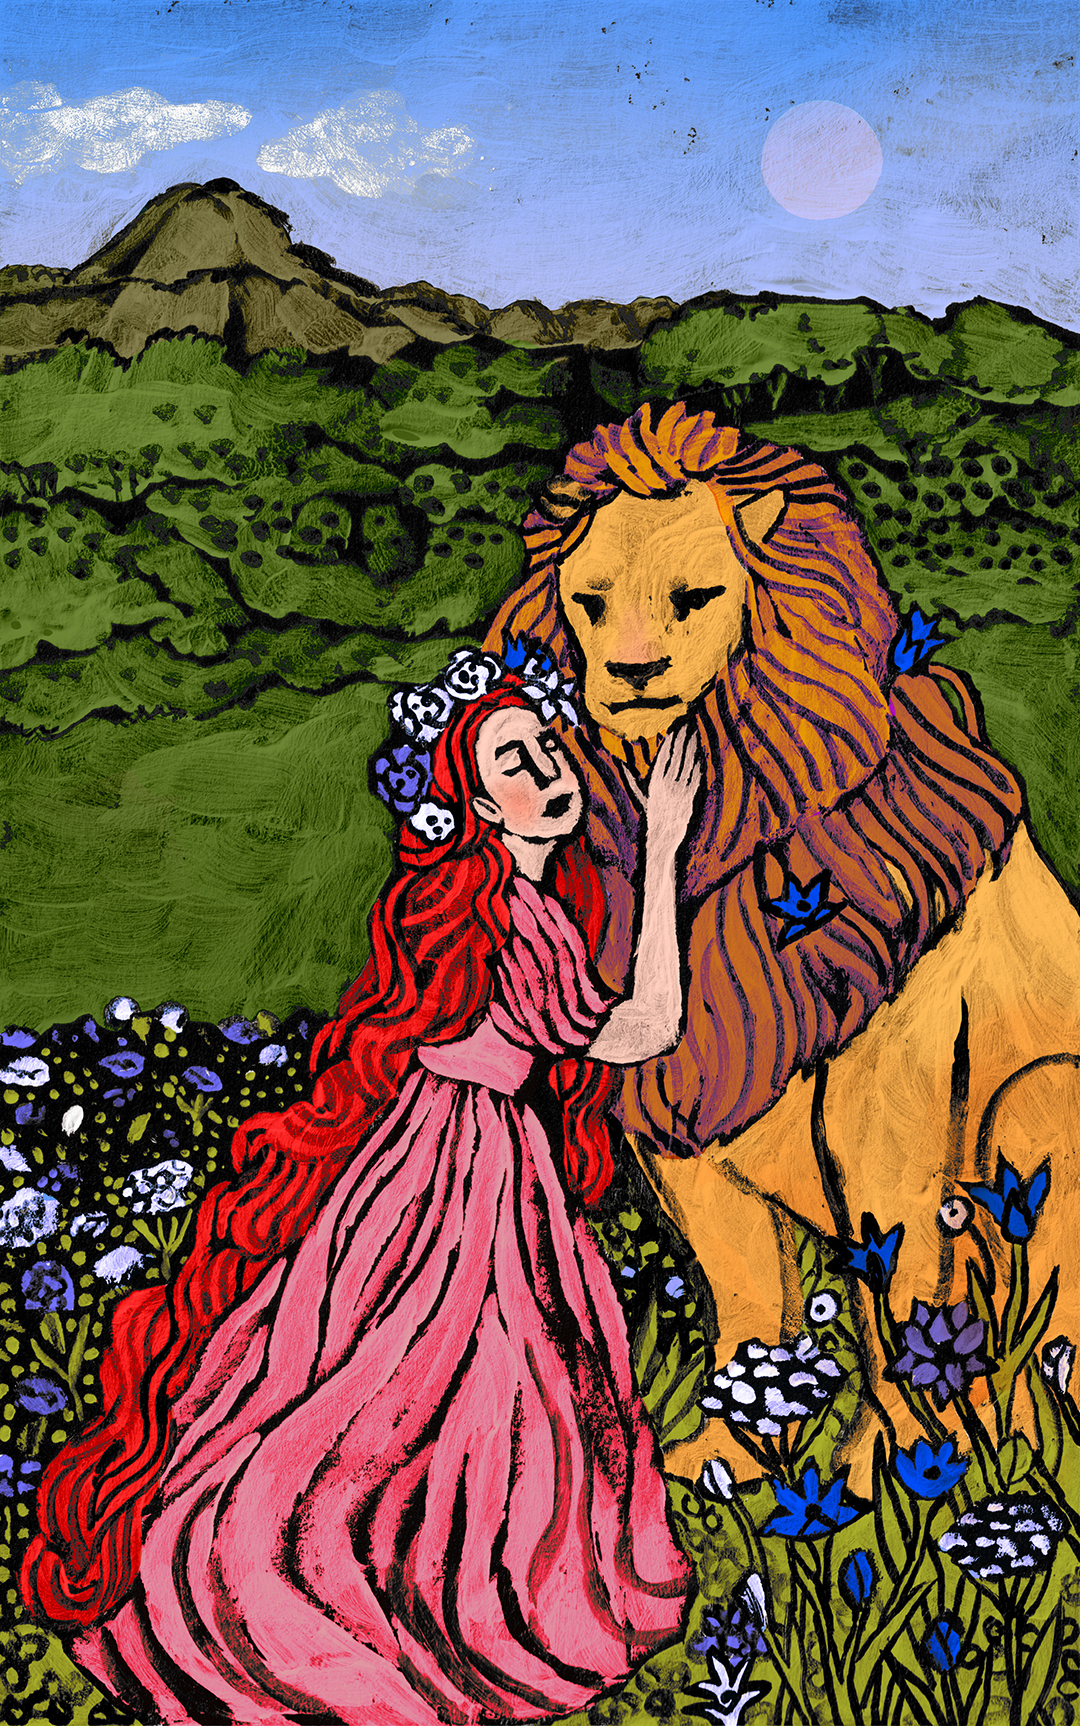 Illustration of a woman with a lion in a flower field.